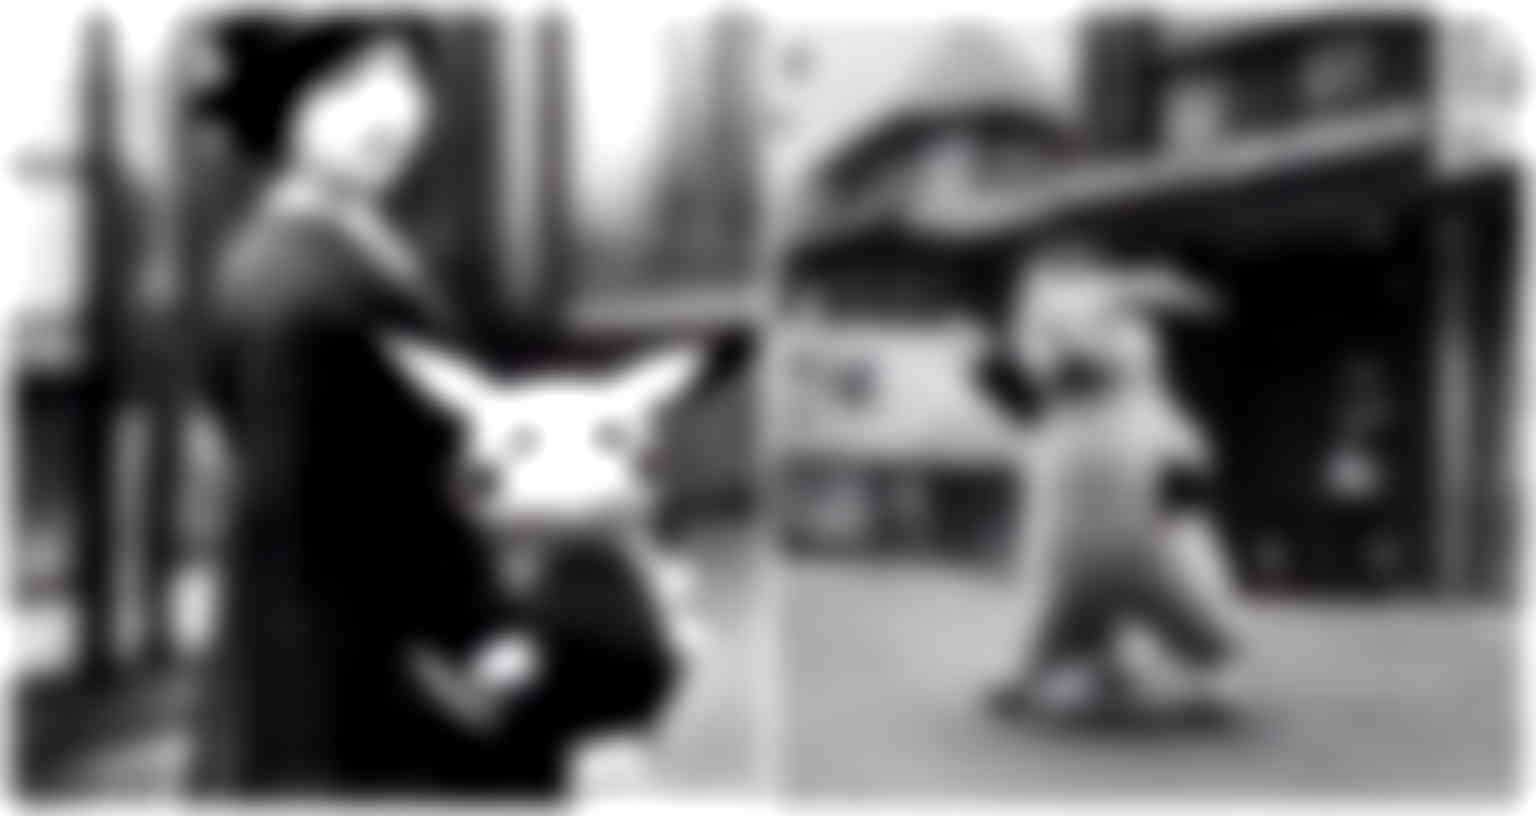 AI creates images depicting Pikachu in 1920s Tokyo